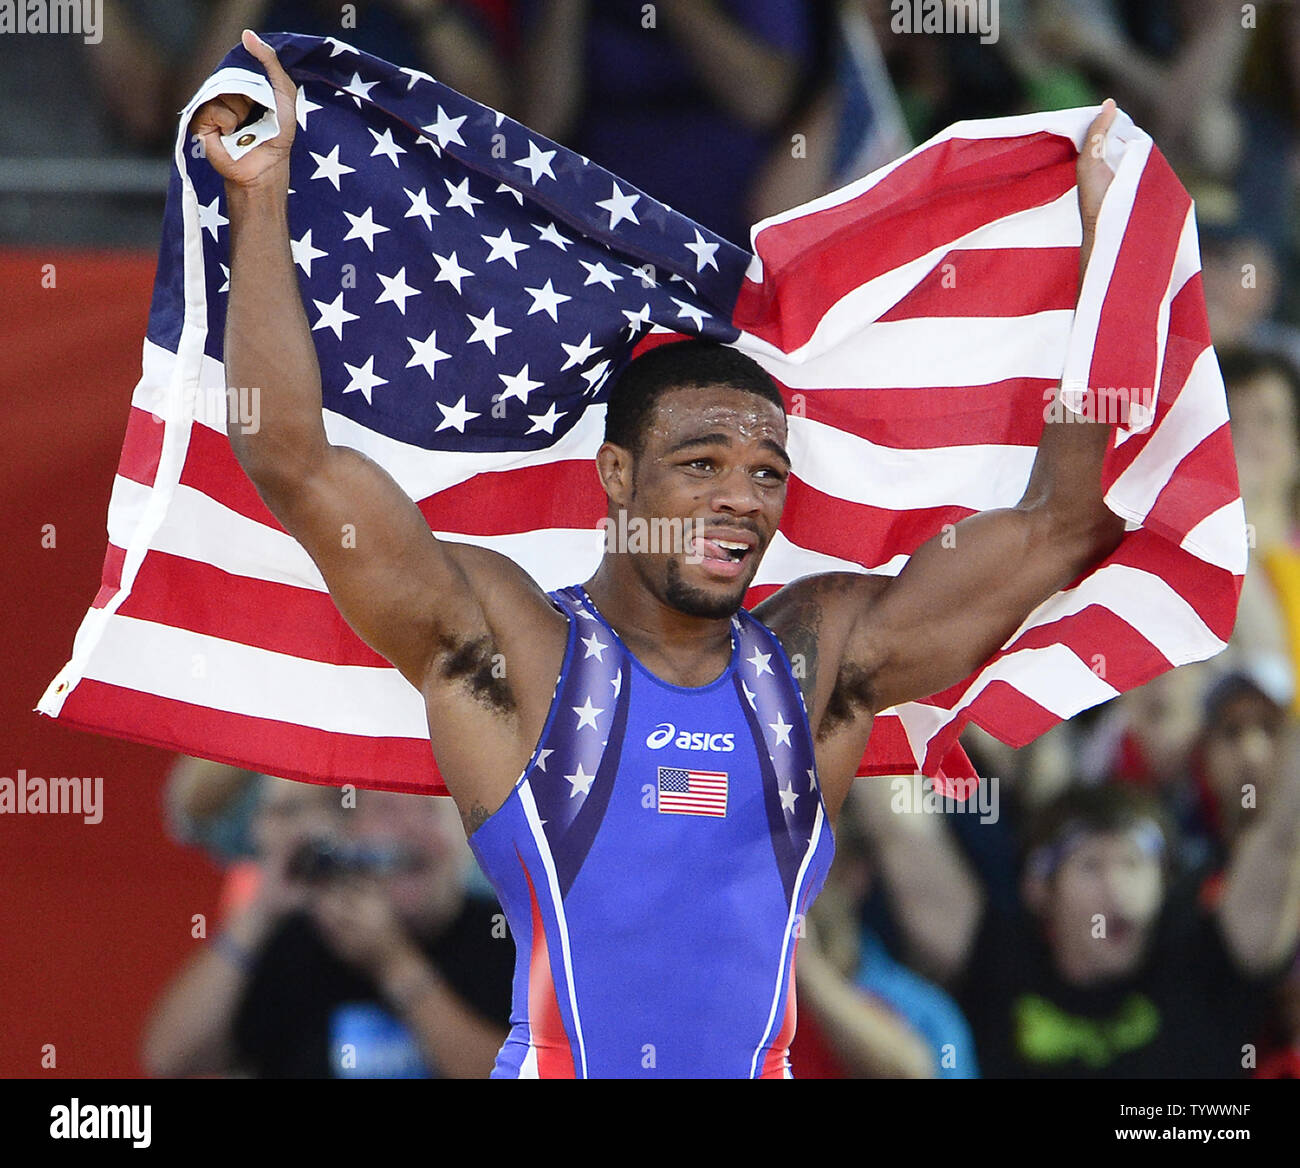 Jordan Ernest Burroughs of the United States of America celebrates after winning the Gold Medal in the Men's 74kg Freestyle Wrestling against Sadegh Saeed Goudarzi of Iran at the London 2012 Summer Olympics on August 10, 2012 in London. UPI/Ron Sachs Stock Photo